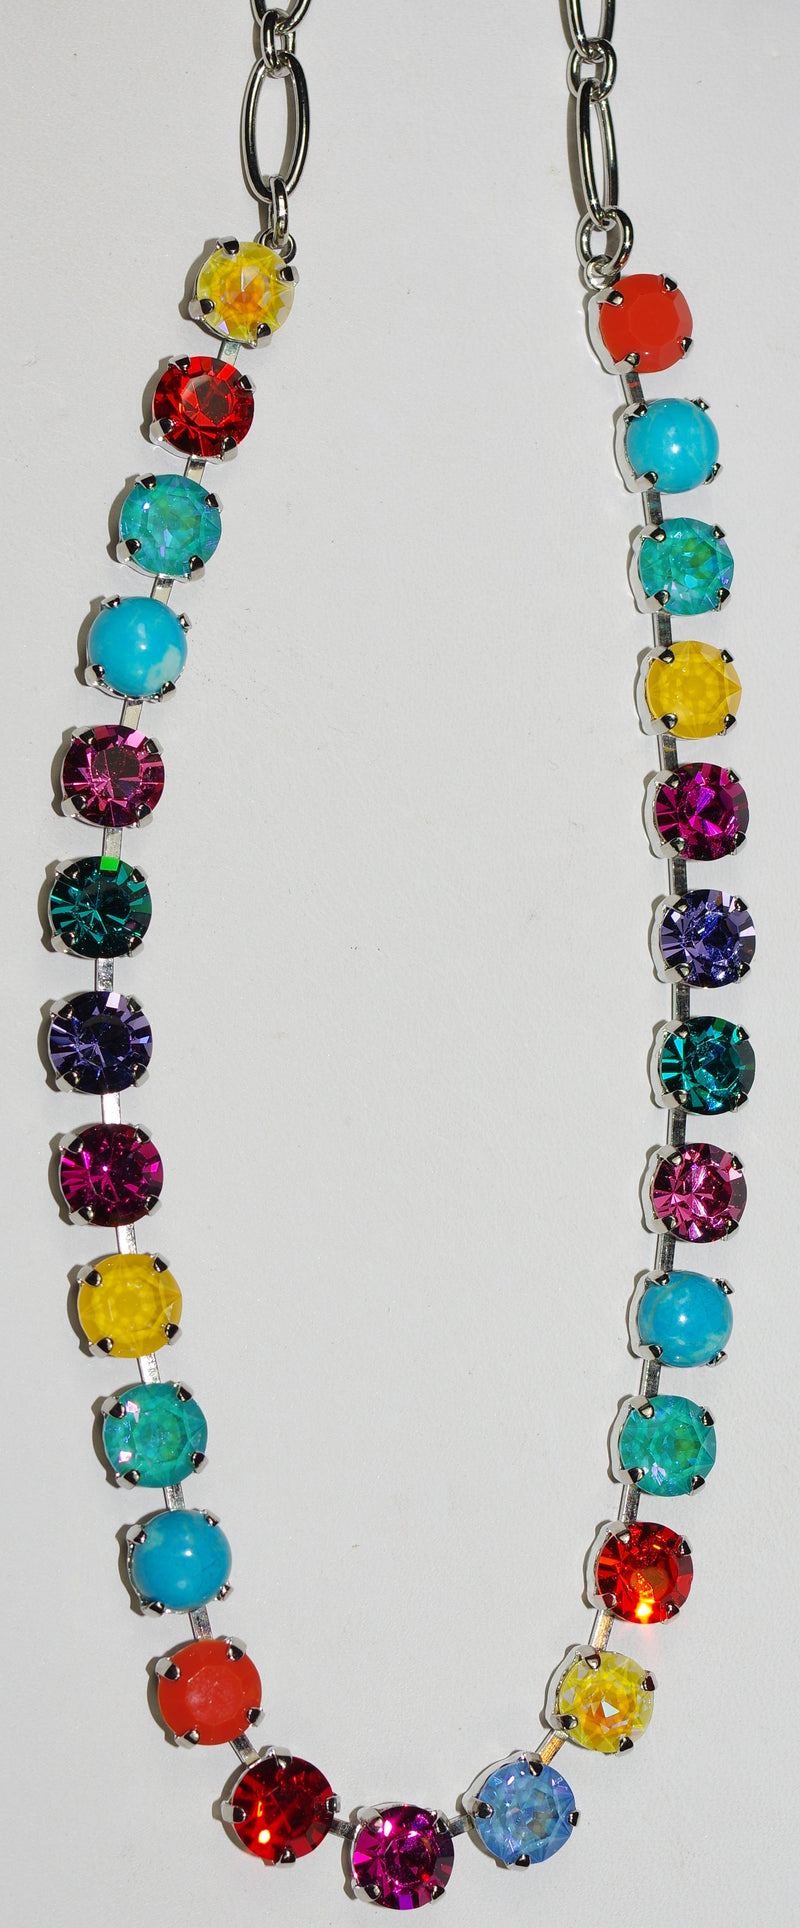 MARIANA NECKLACE POPPY BETTE: amber, orange, blue, teal, yellow, purple 1/4" stones in rhodium setting, 17" adjustable chain